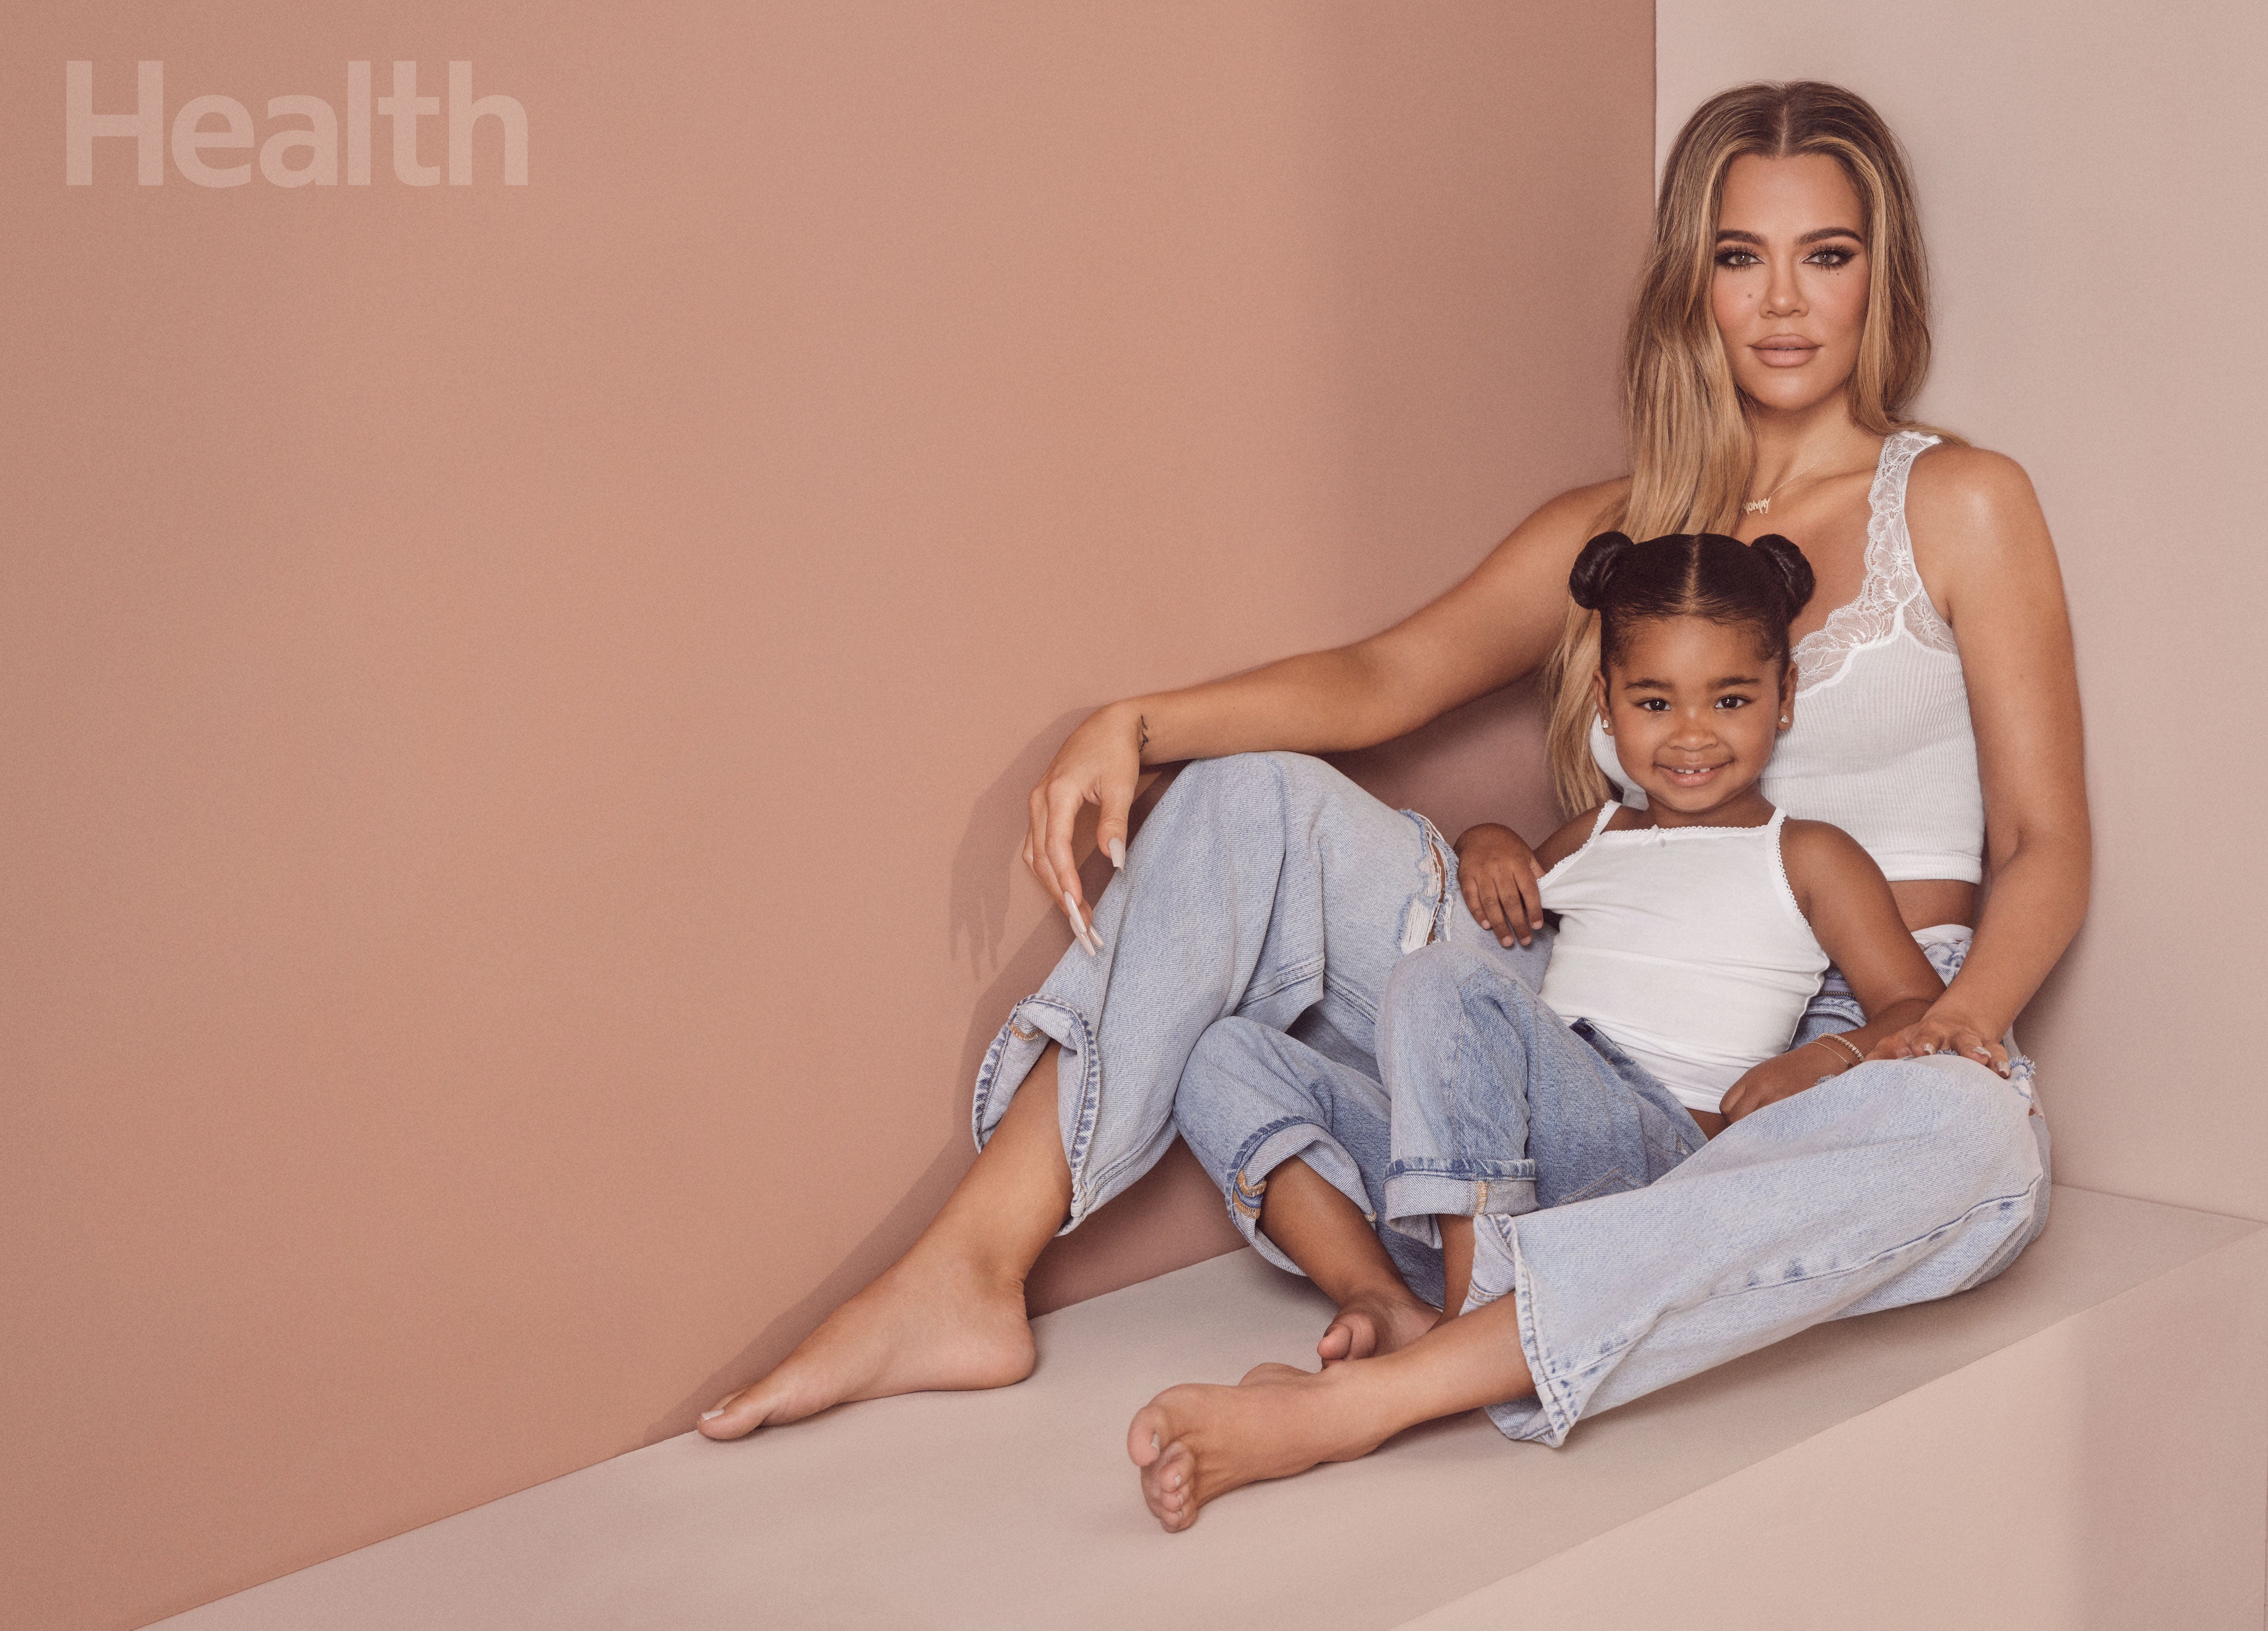 Khloe Kardashian's Latest Outfit for True Thompson Is So Fetch